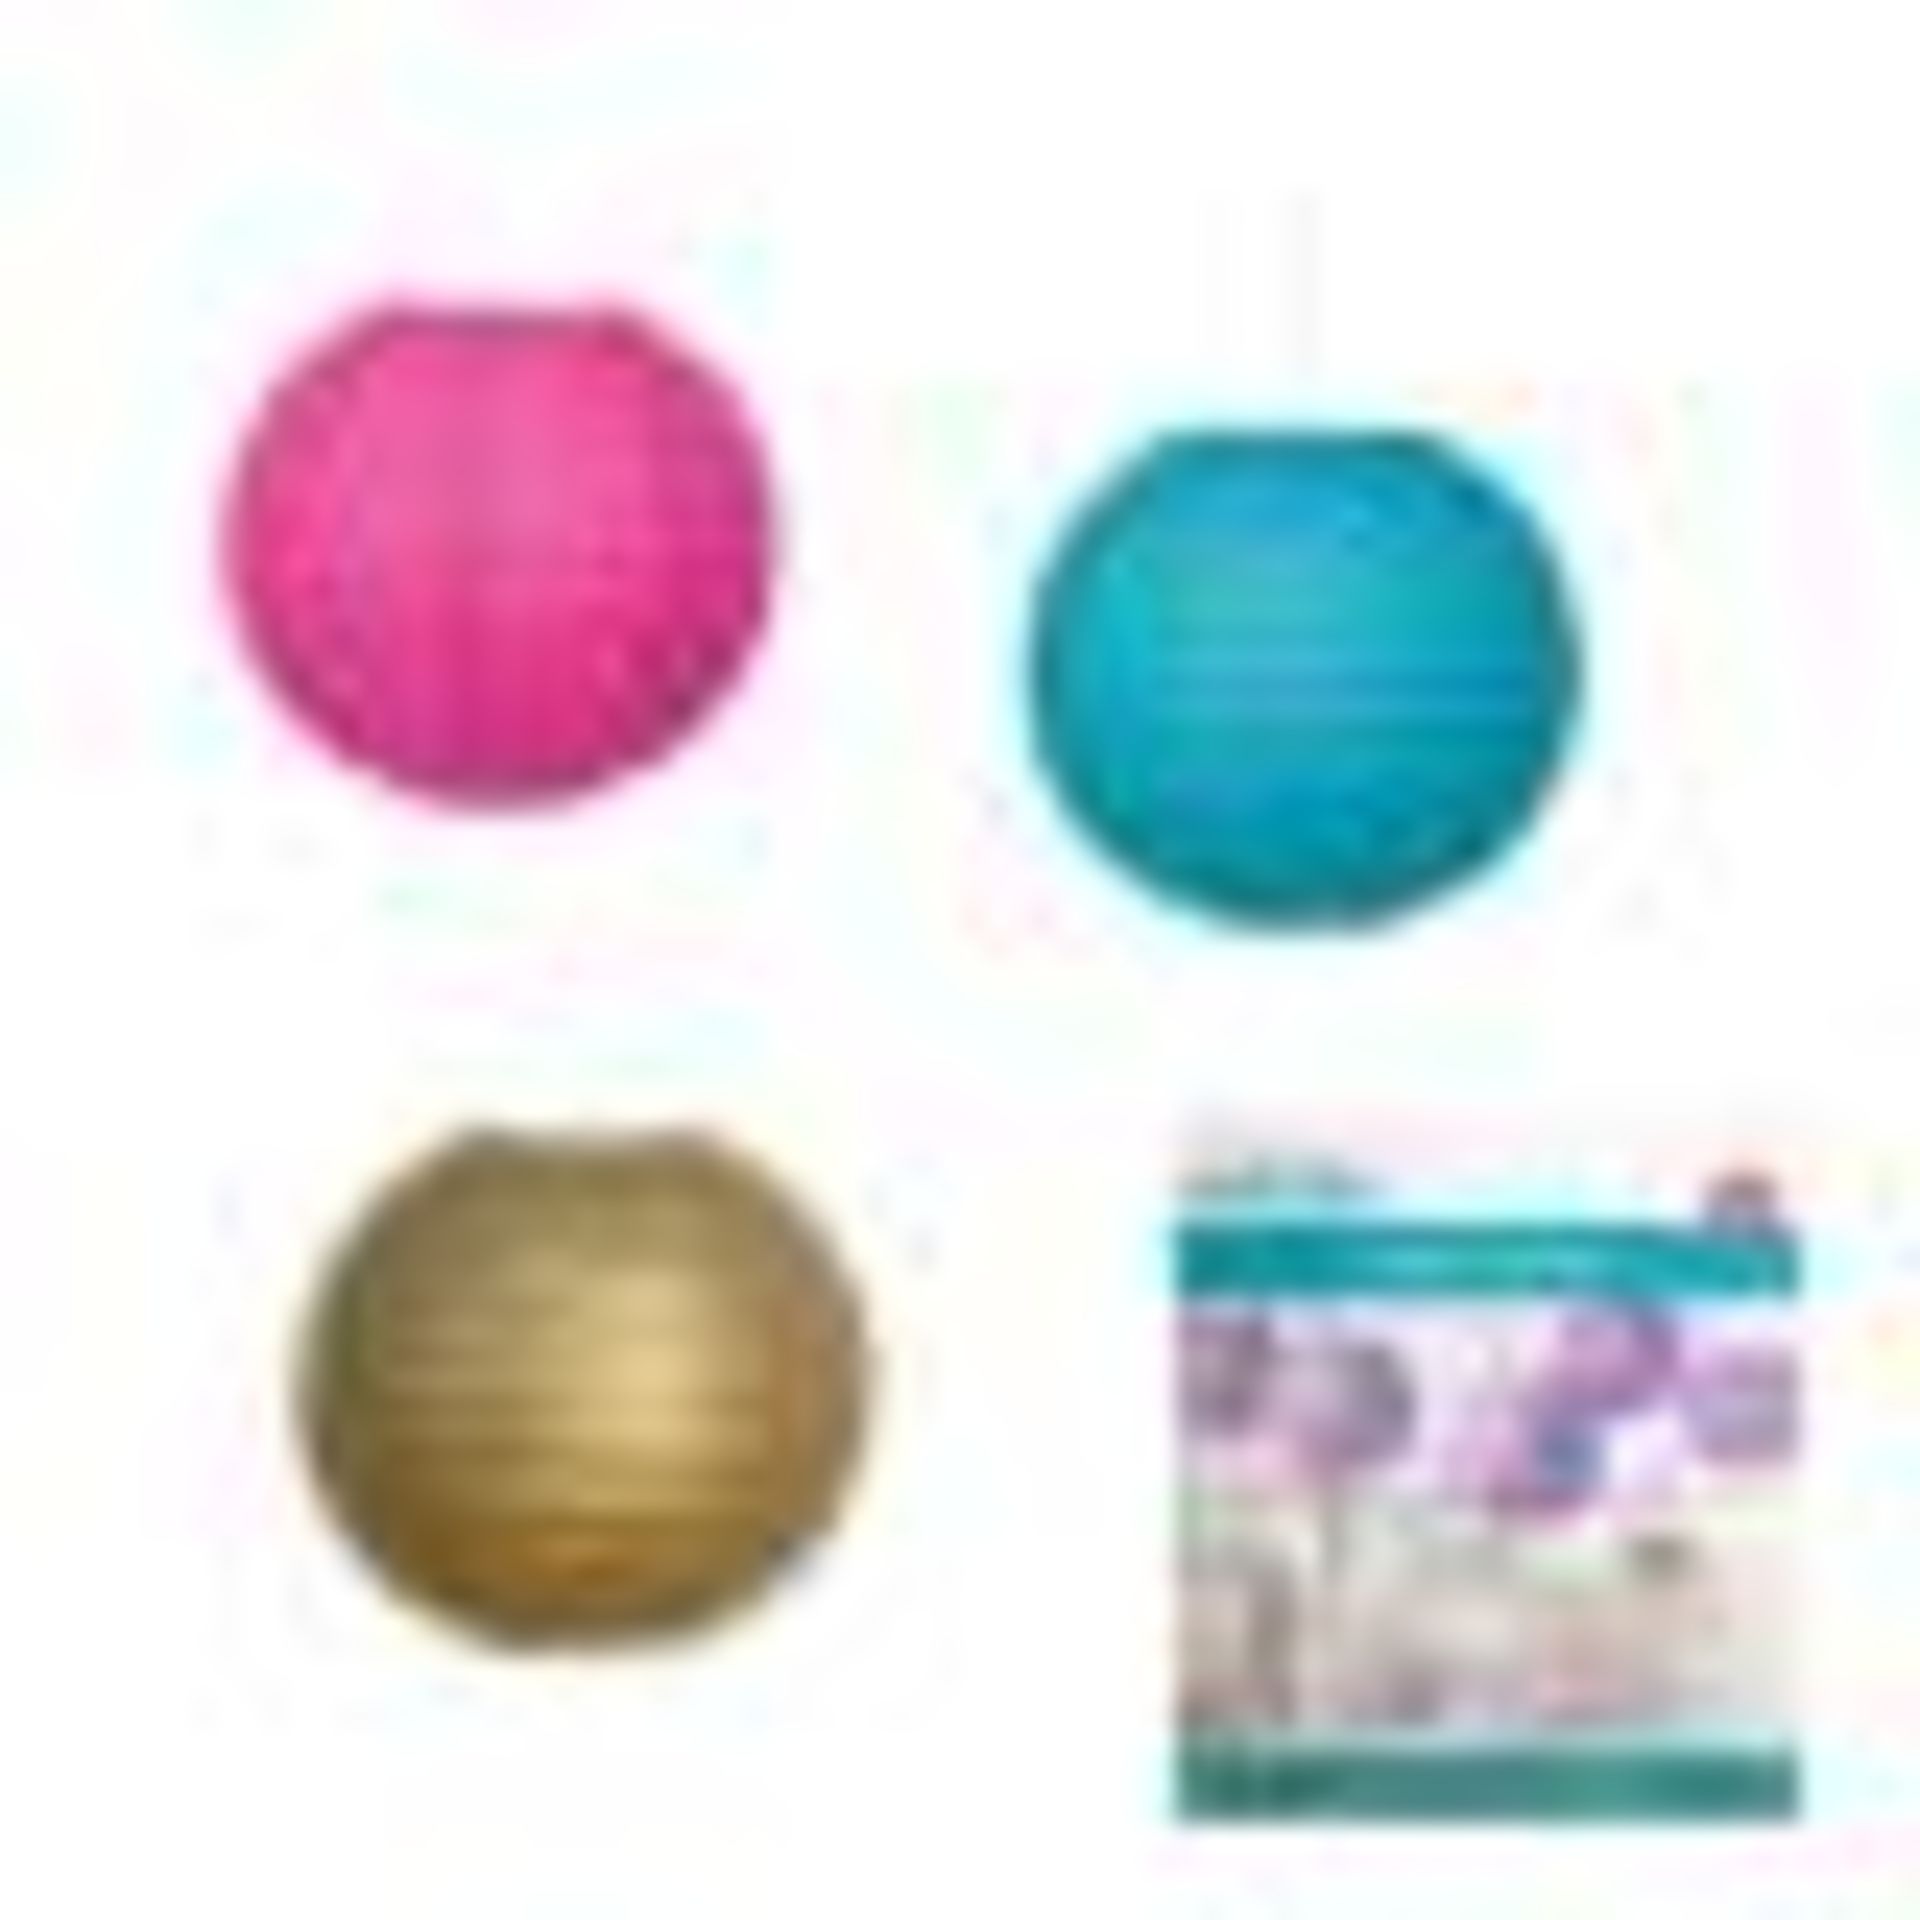 SURPRISE BOX OF 10,000 PARTY ITEMS INCLUDING BANNERS, LANTERNS, FLUTTER BALLS AND GARLANDS - Image 4 of 7